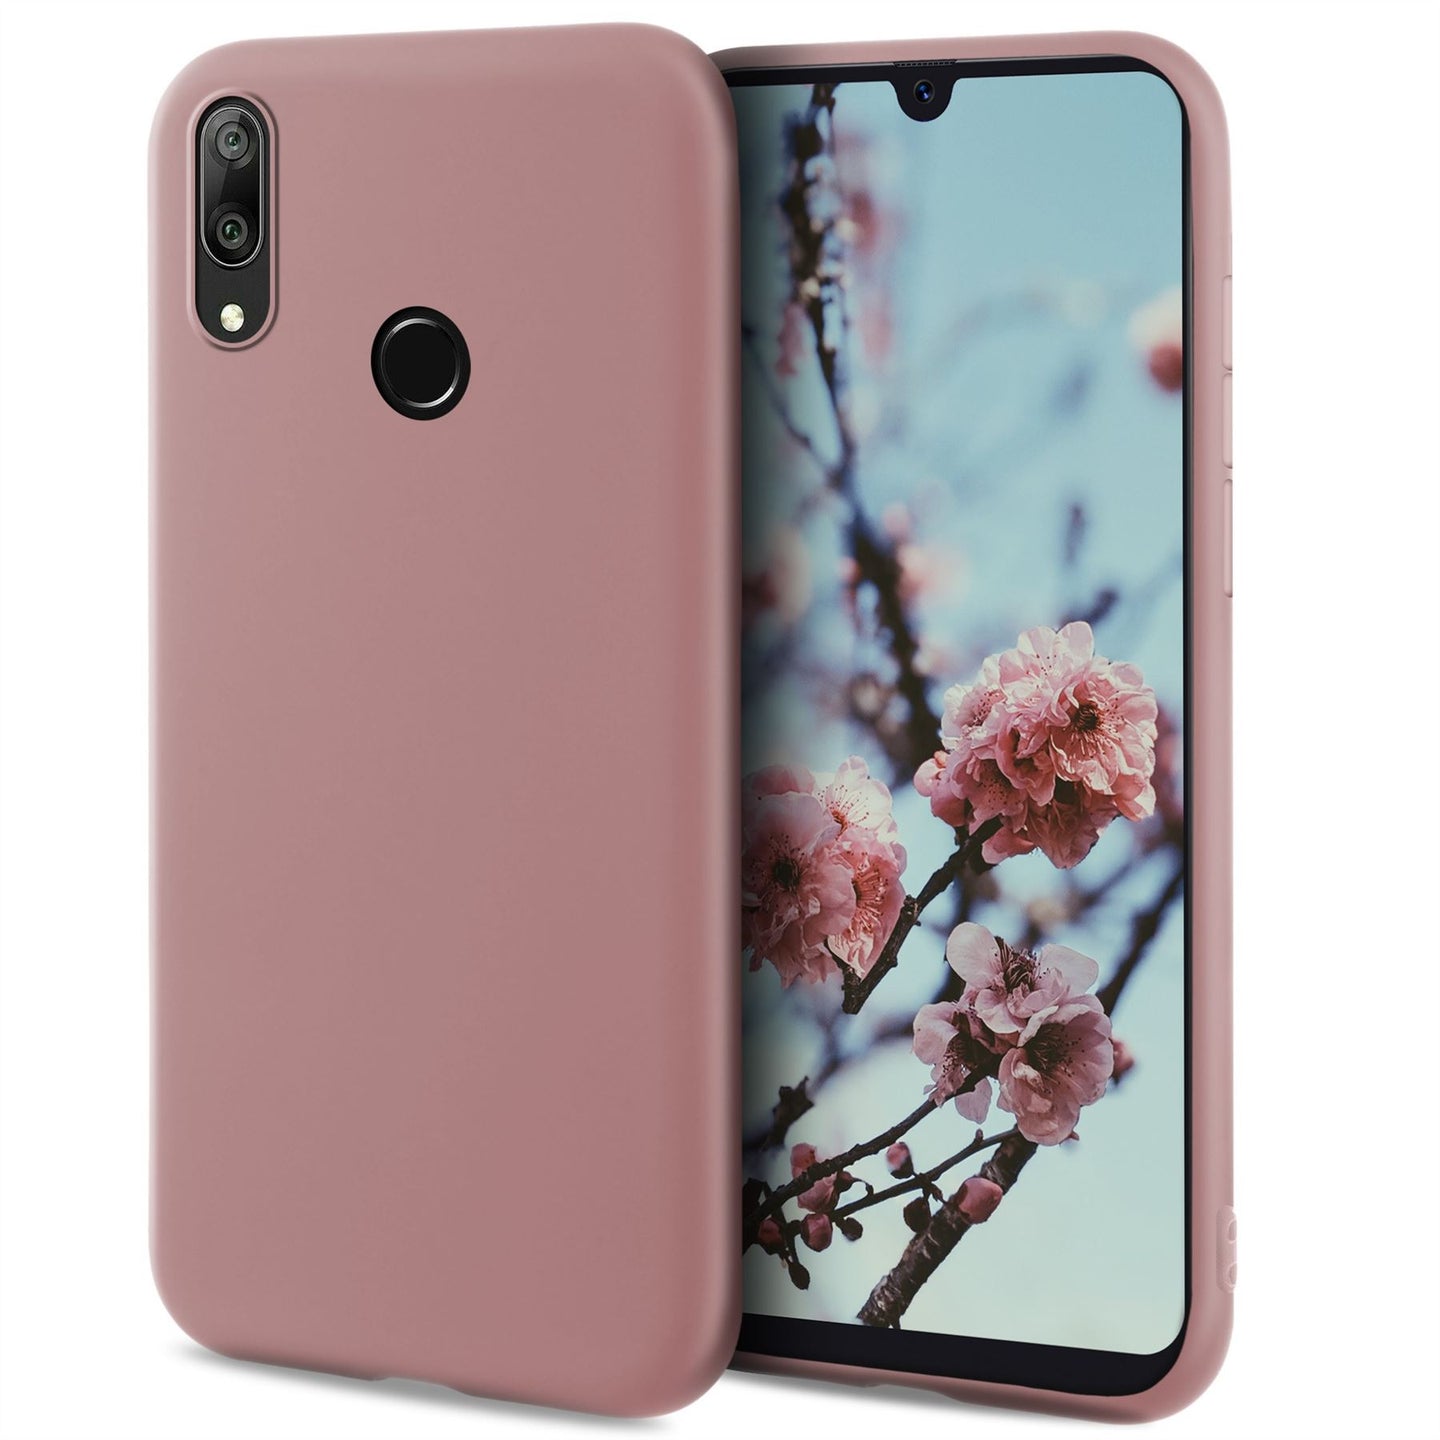 Moozy Minimalist Series Silicone Case for Huawei Y7 2019, Rose Beige - Matte Finish Slim Soft TPU Cover